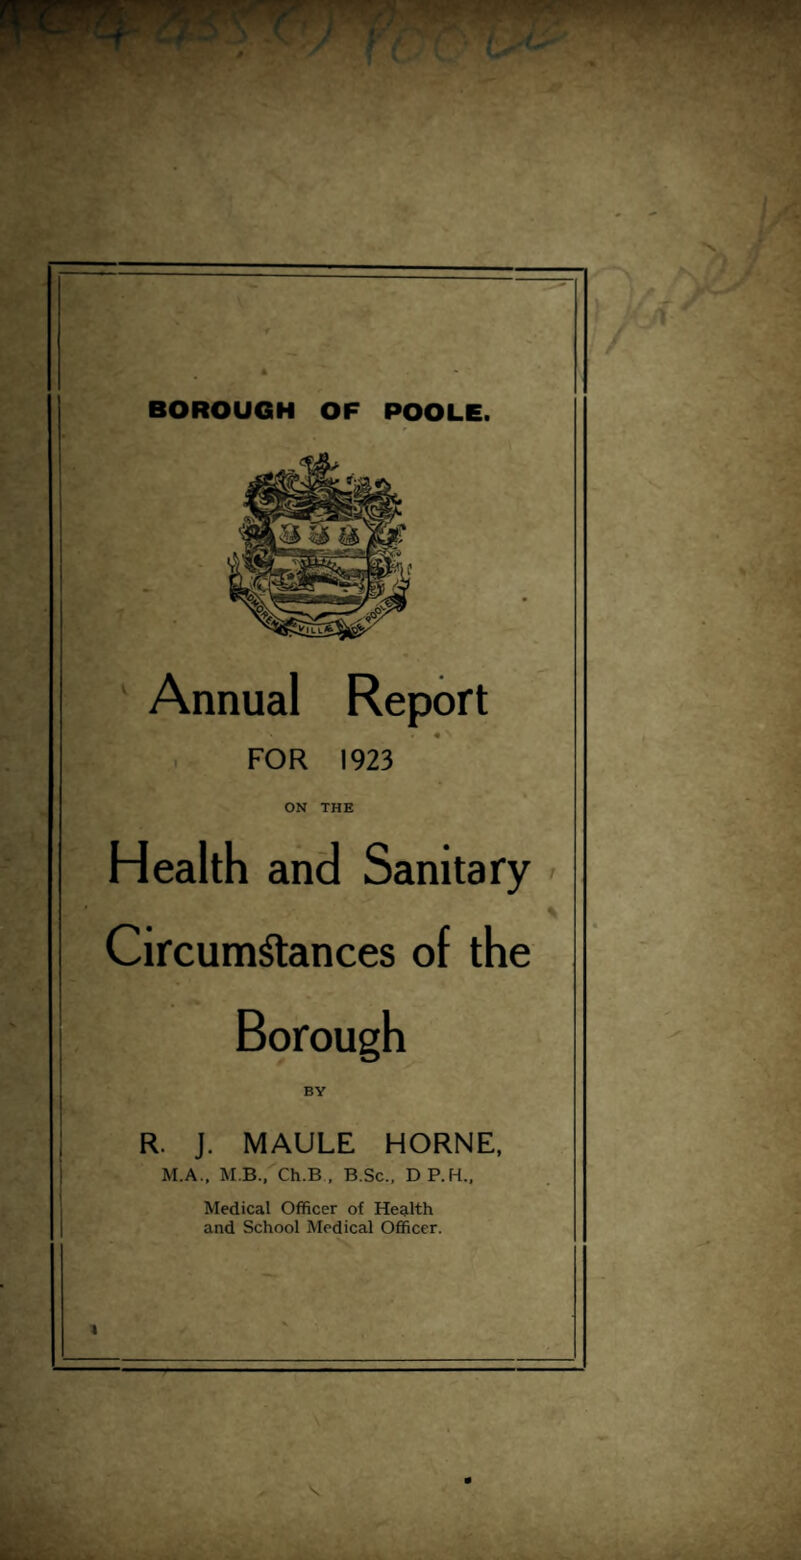 BOROUGH OF POOLE. Annual Report . • N FOR 1923 ON THE Health and Sanitary % Circumstances of the Borough BY R. J. MAULE HORNE, M.A., M B., Ch.B , B.Sc., DP.H., Medical Officer of Health and School Medical Officer. I 1